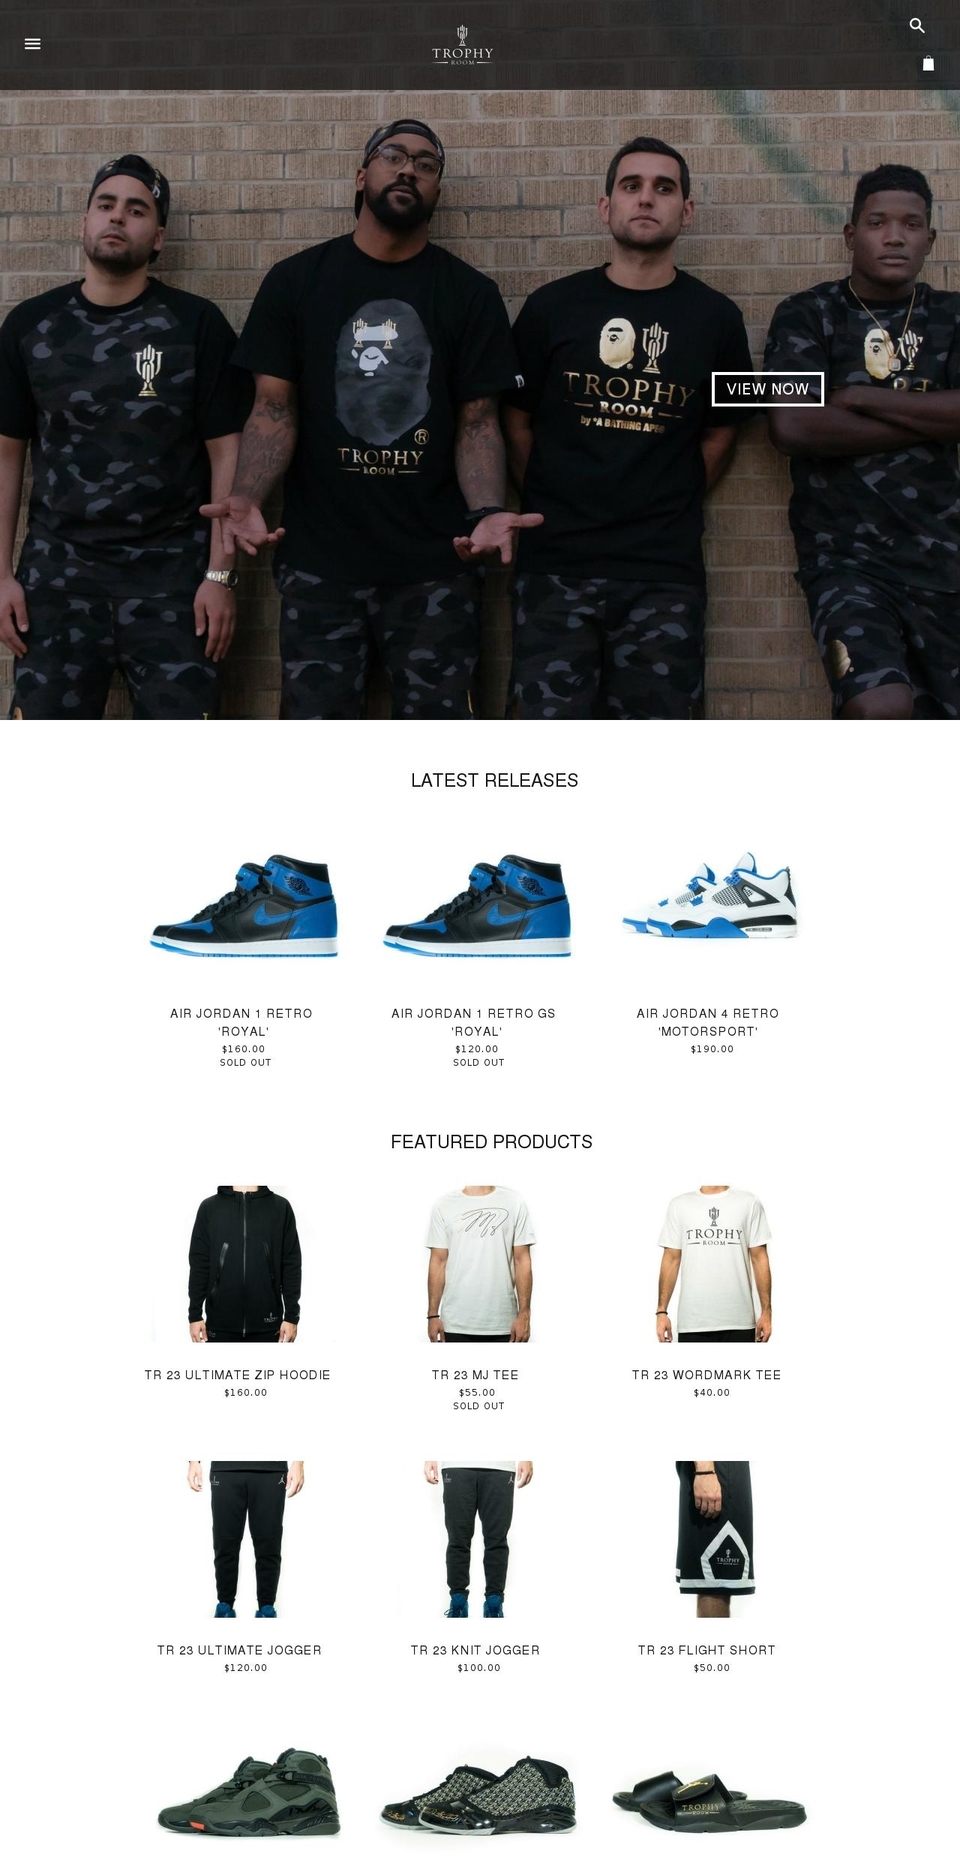 Highlight Shopify theme site example trophyroomstore.com